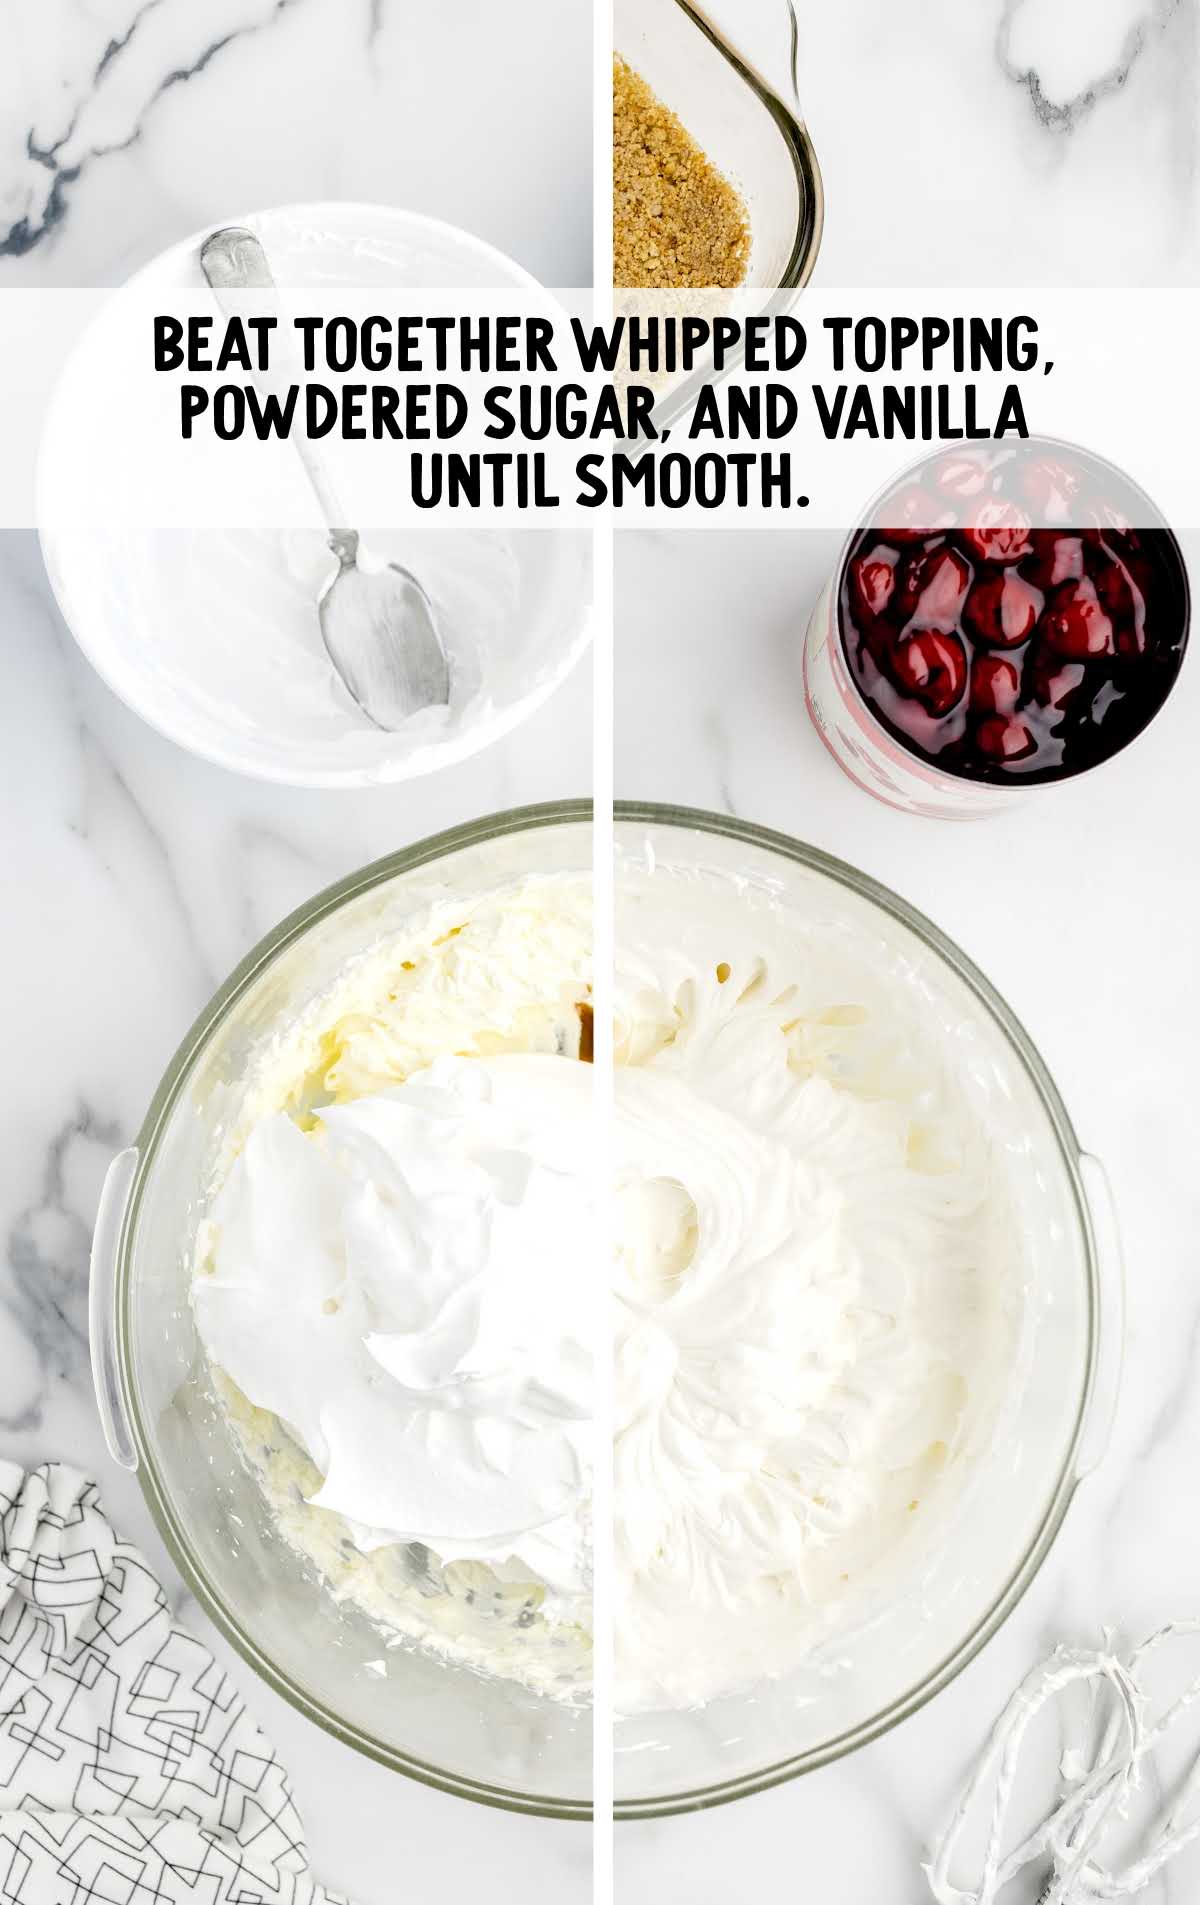 whipped topping, powdered sugar, and vanilla combined in a bowl